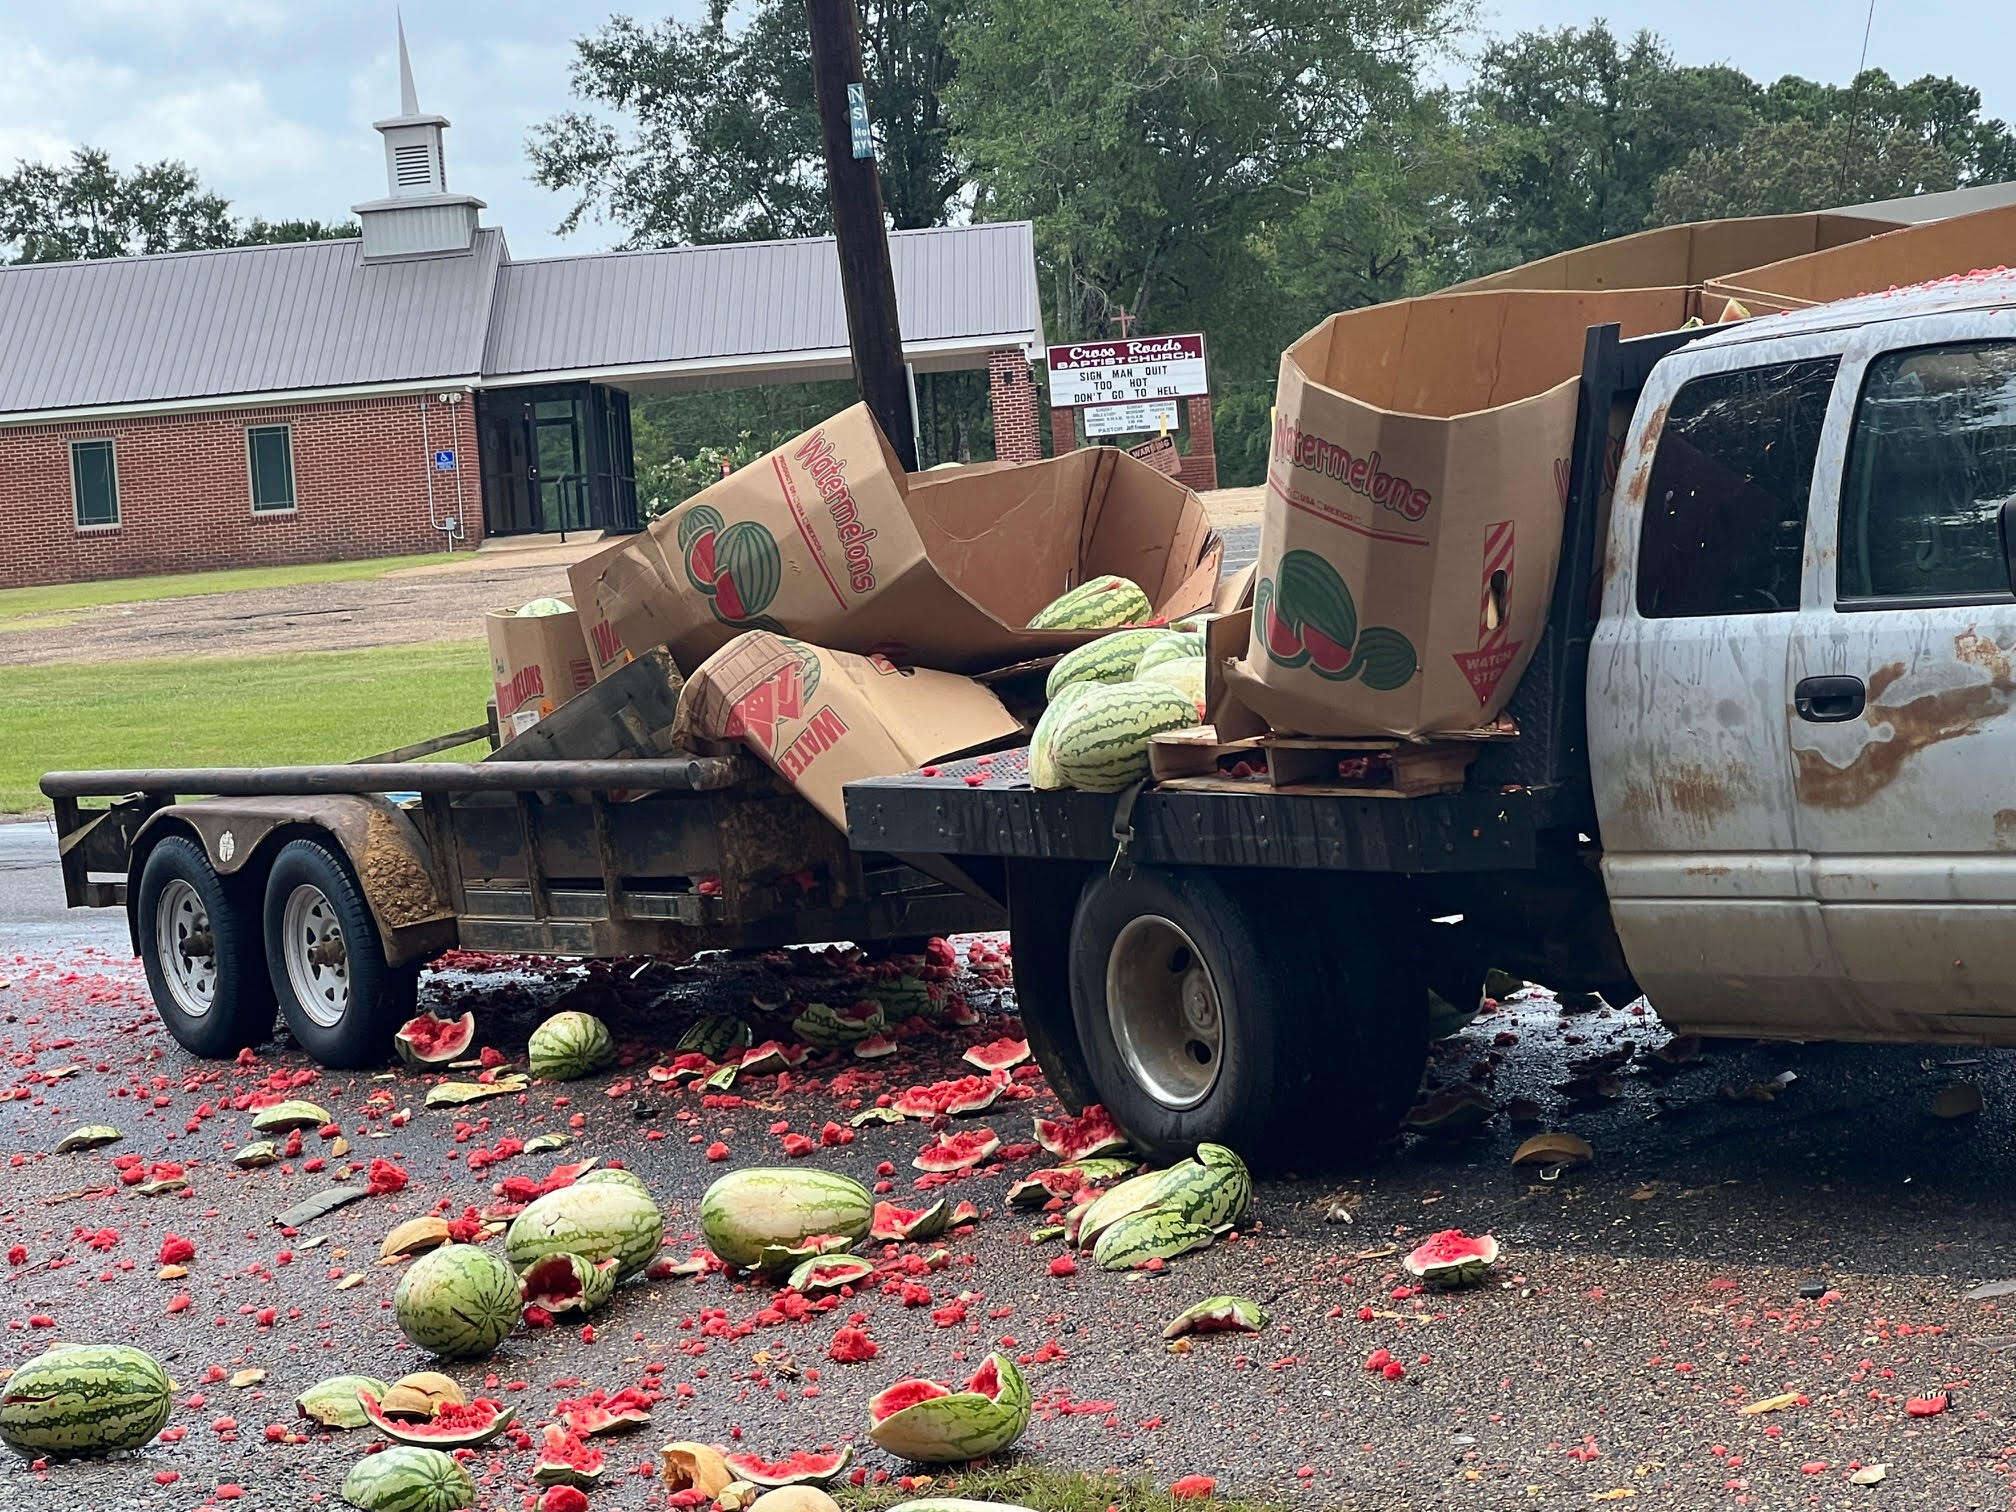 A produce truck after accident that crushed melons.